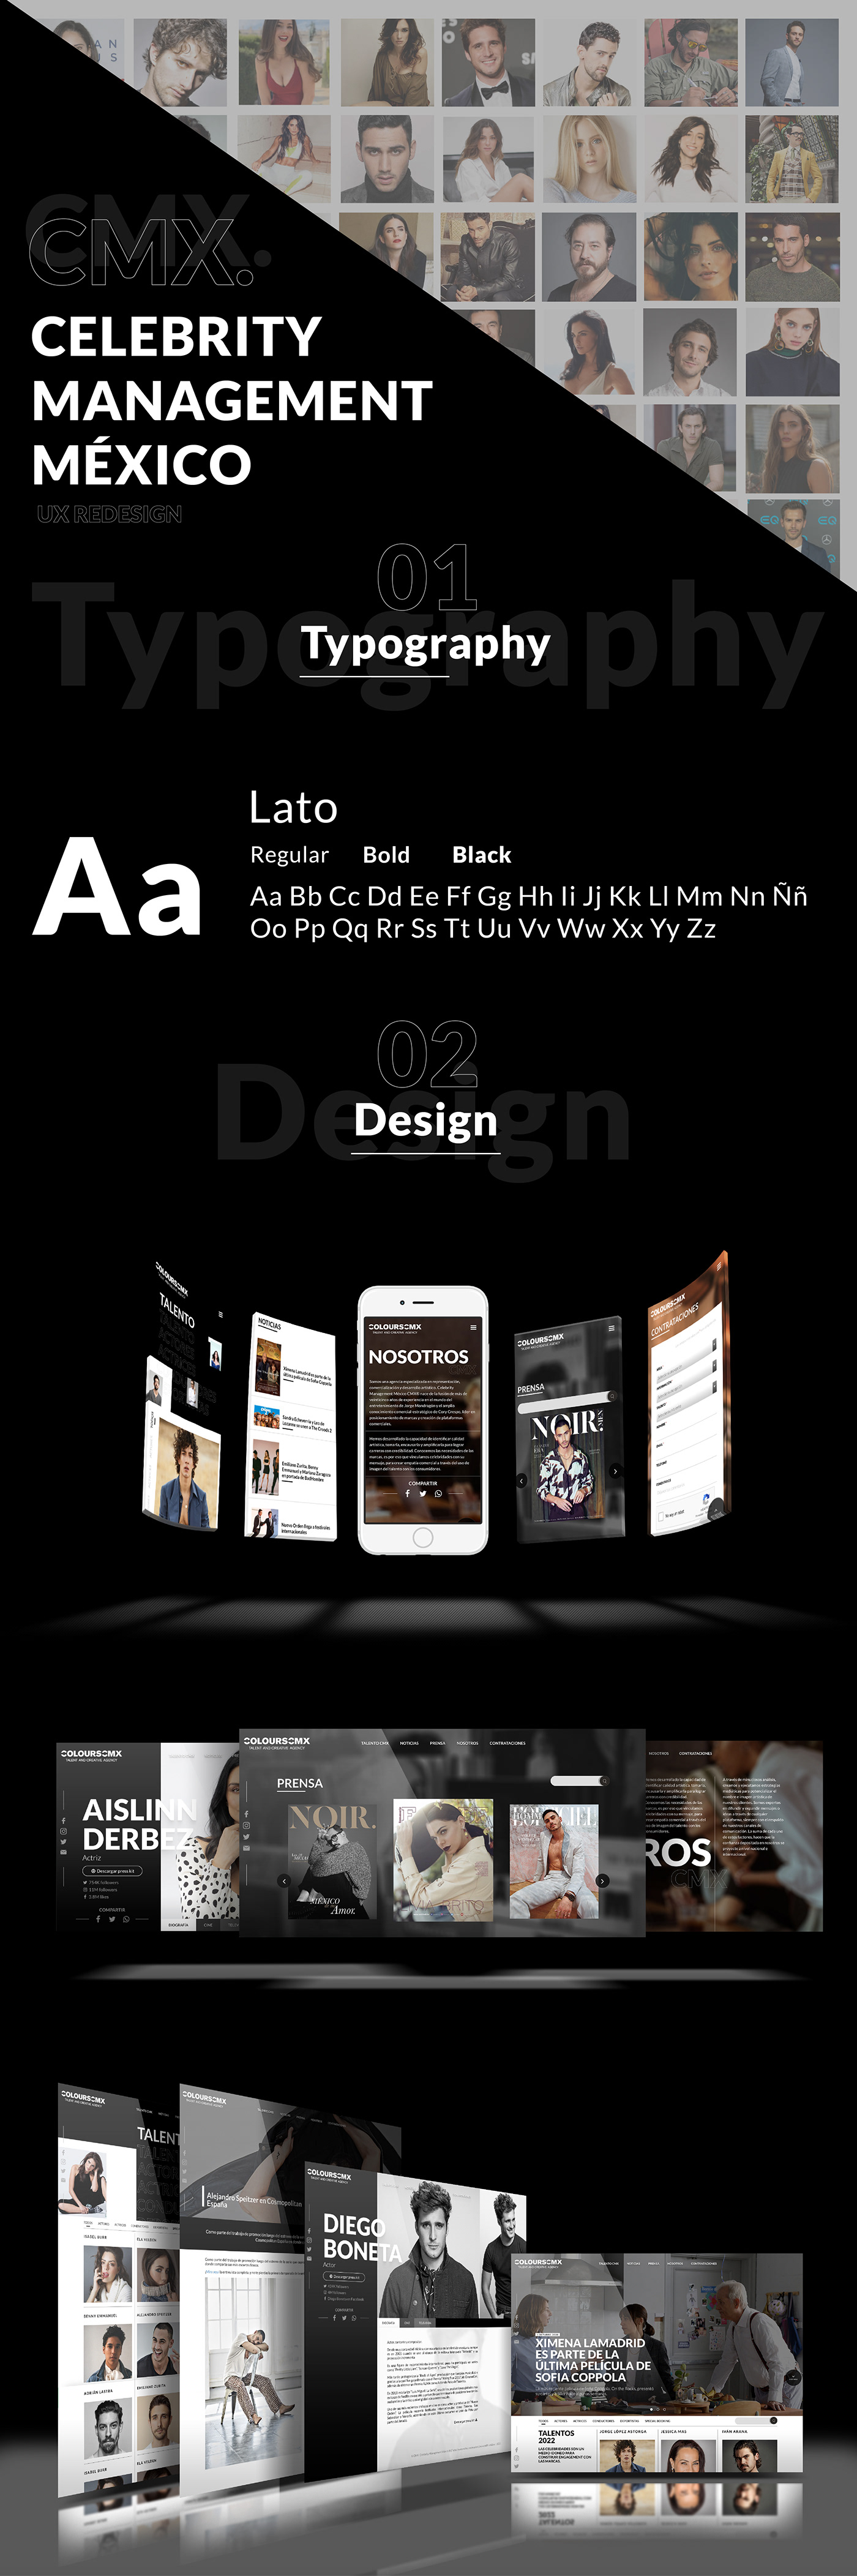 Celebrity design graphic design  interfaces management mexico redesign ux web page xD